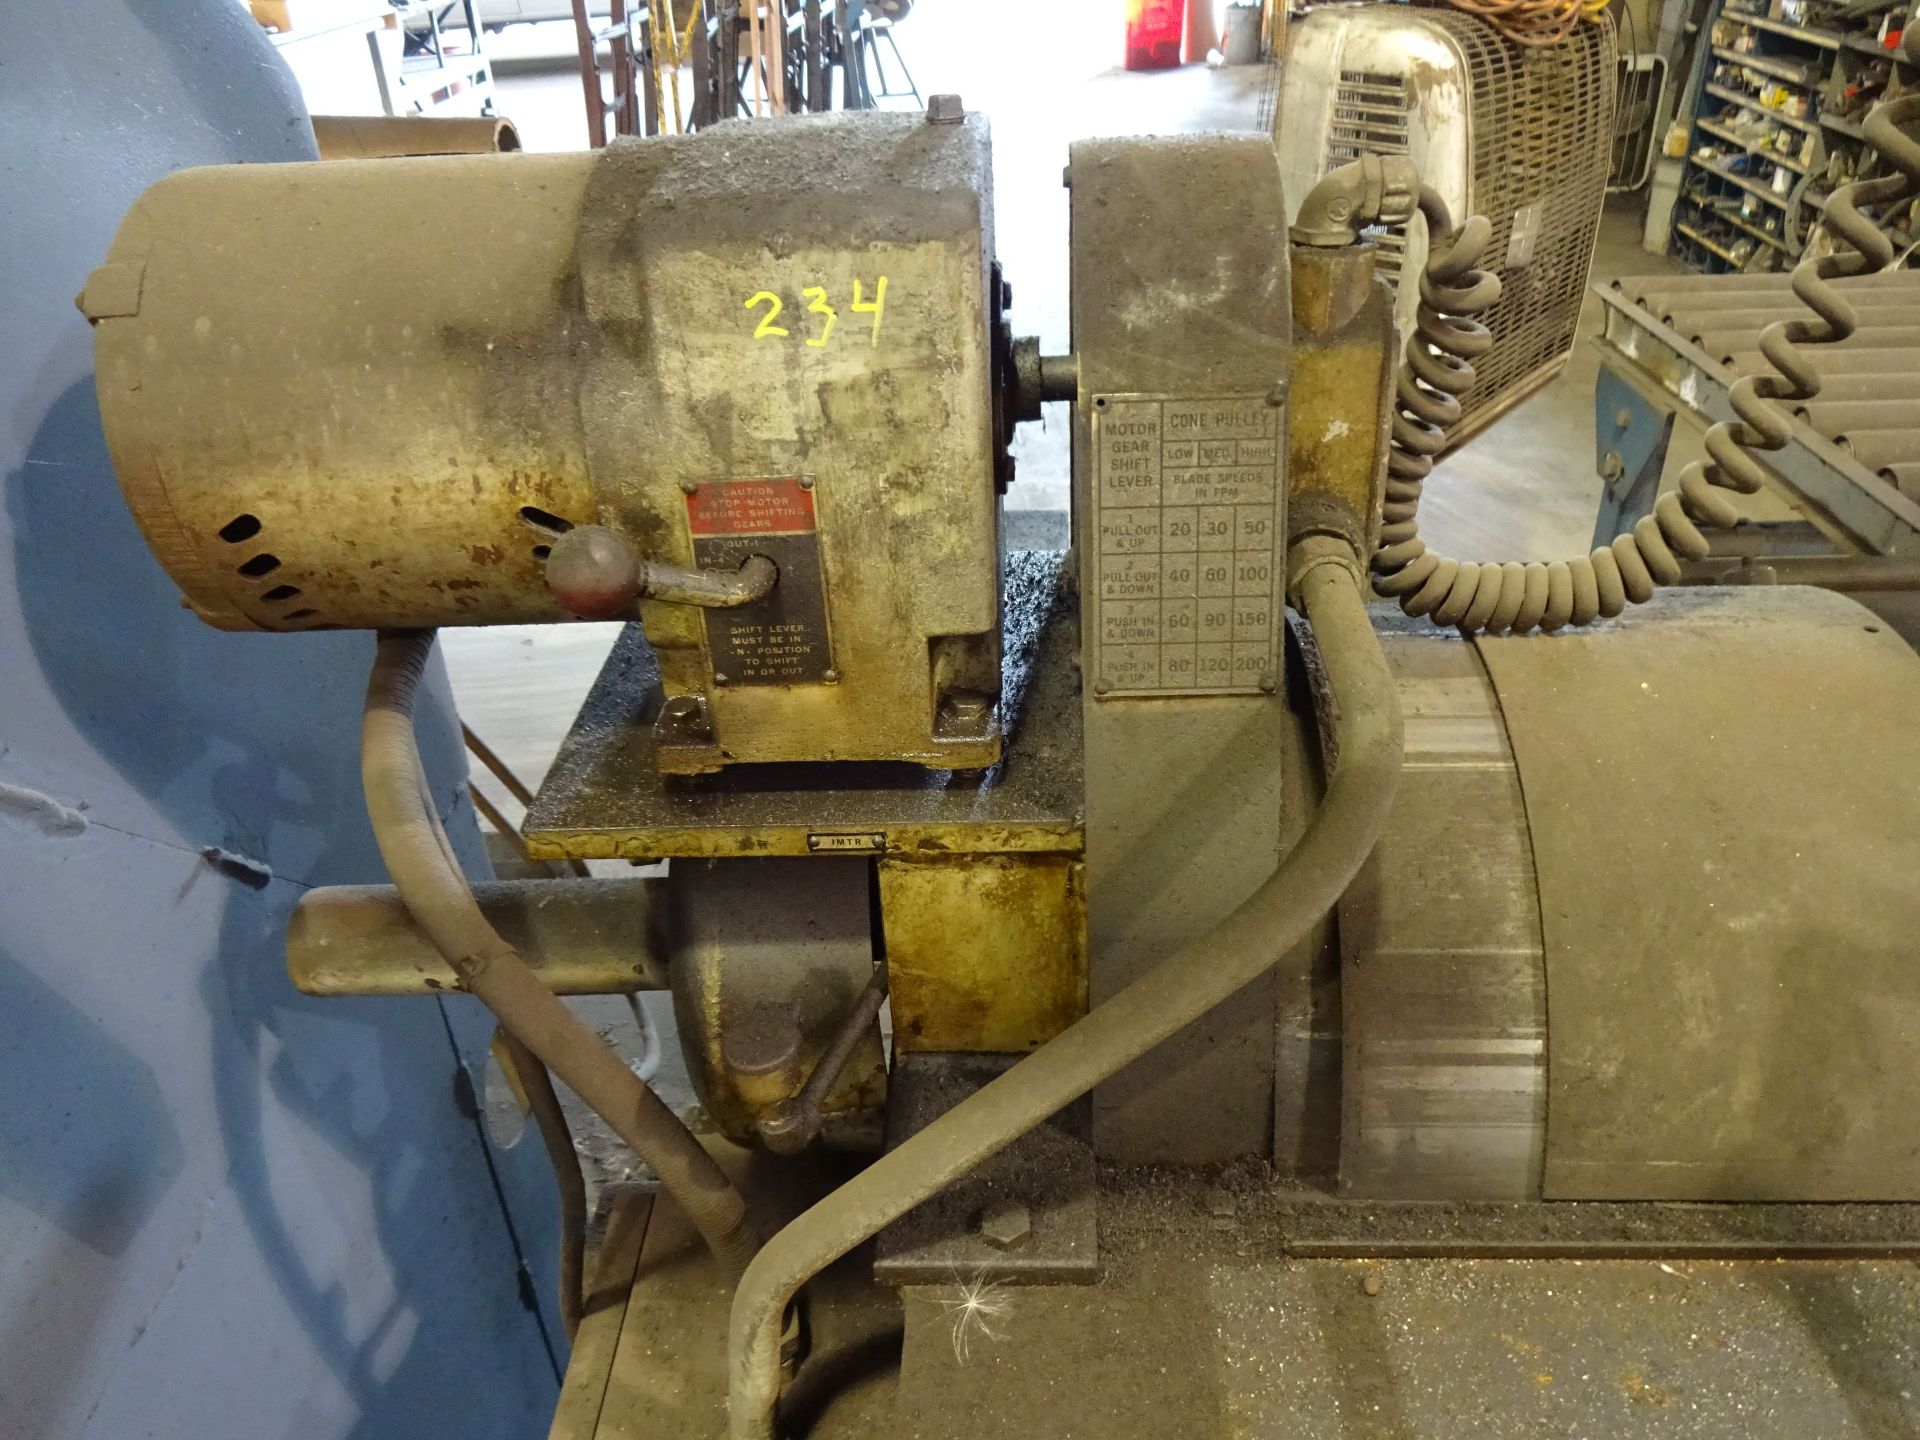 18" X 20" MARVEL SERIES 8/M8/81 VERTICAL BAND SAW; S/N 811948, WITH FEED AND OUT TAKE ROLLER - Image 3 of 8